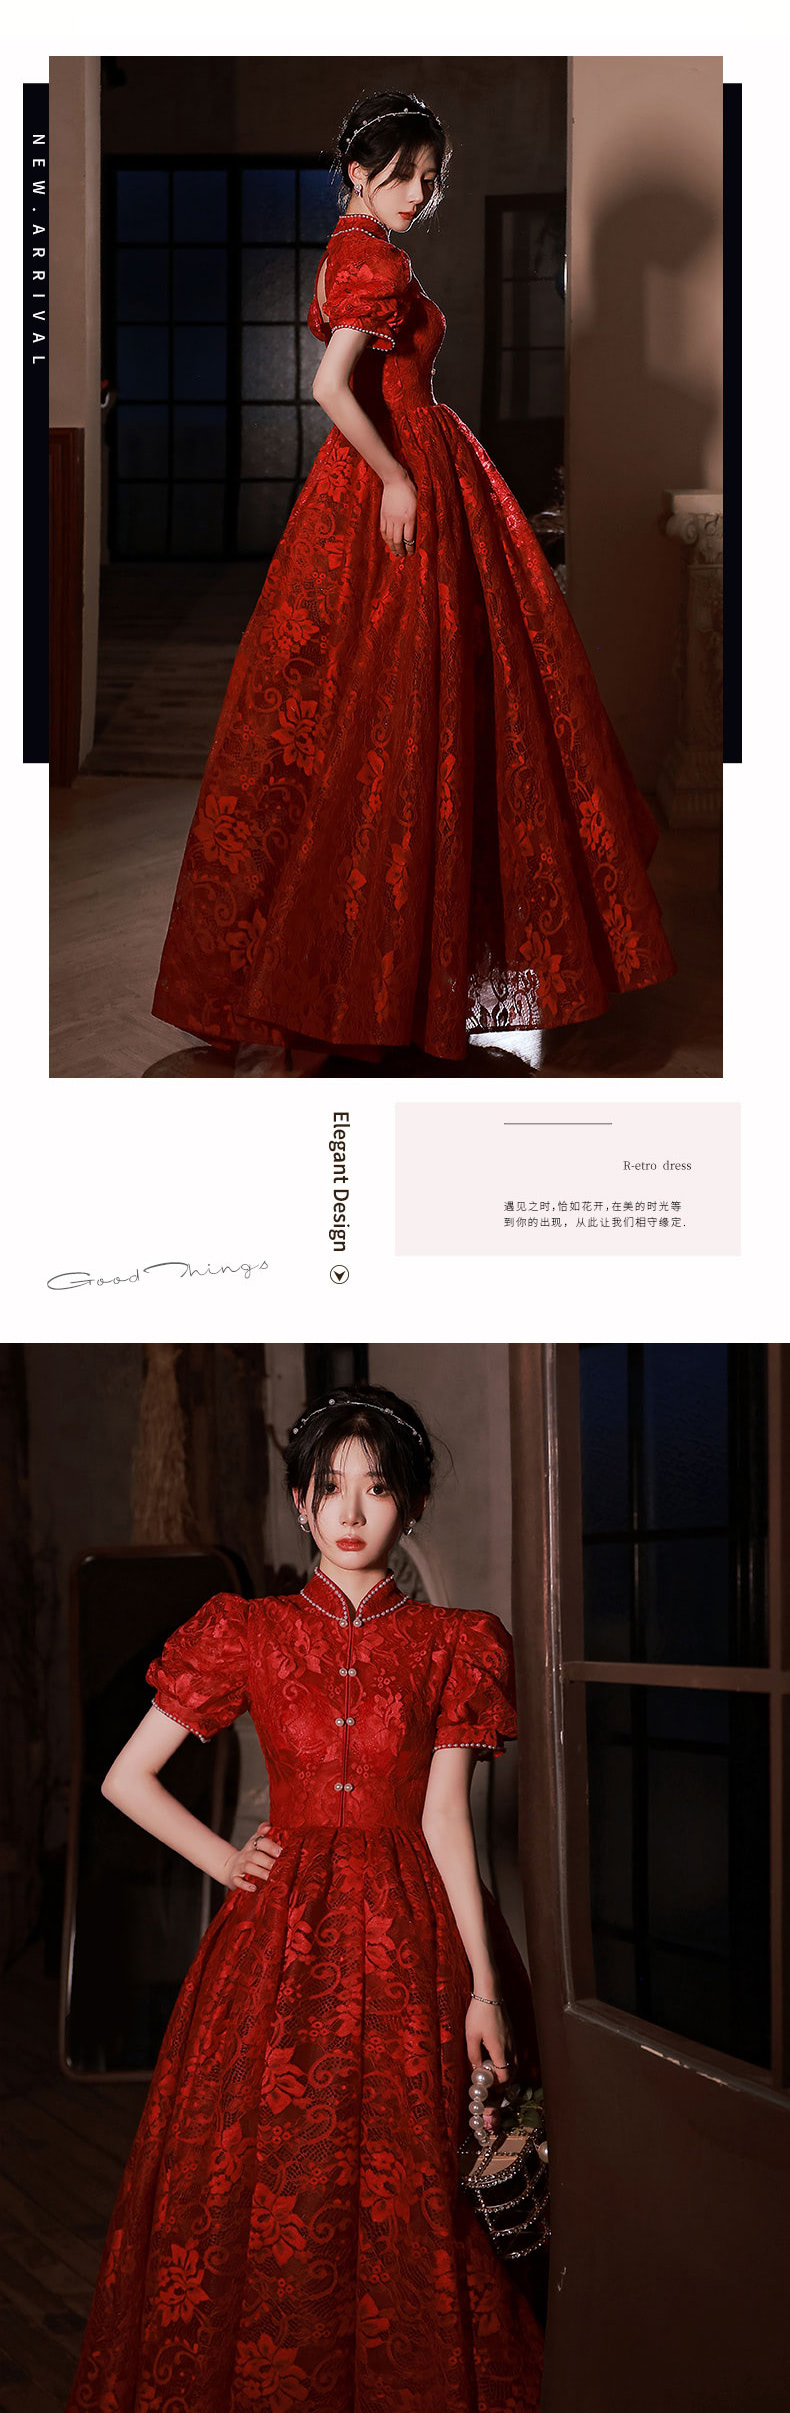 Aesthetic-Embroidered-Red-Prom-Dress-for-Wedding-Banquet-Party09.jpg